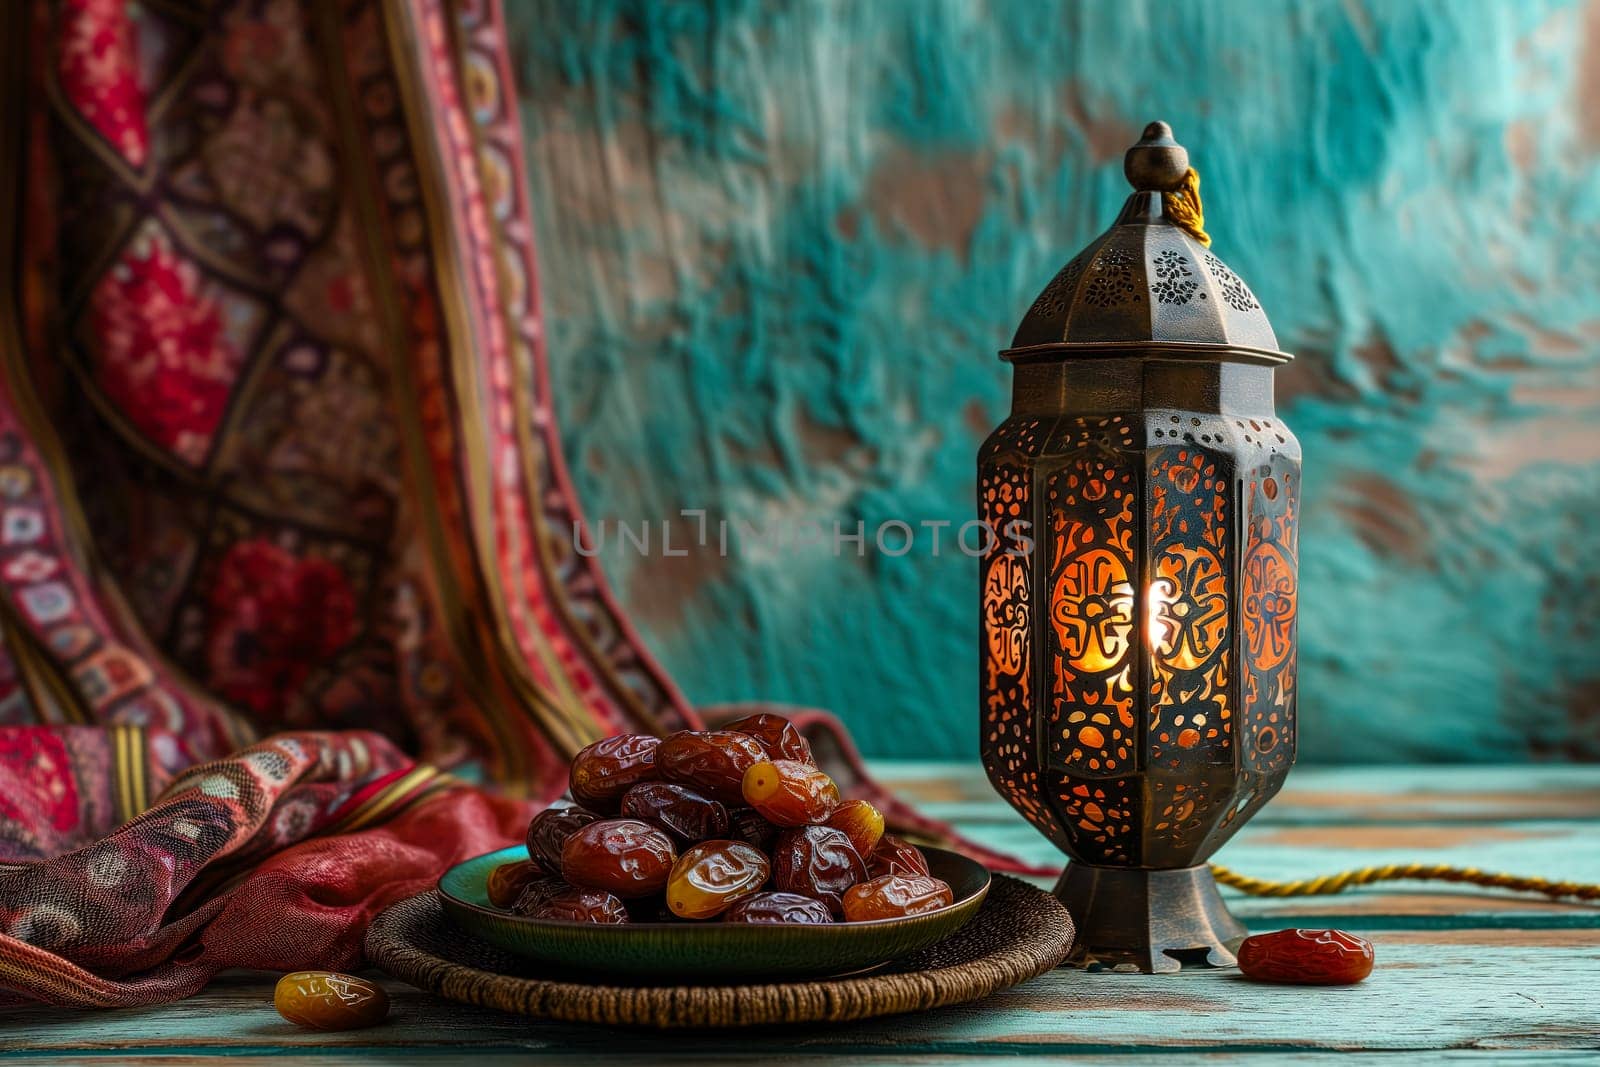 Ramadan lantern with a plate of succulent figs, set on an ornate table with intricate designs, evoking the rich traditions and serene moments of the holy month